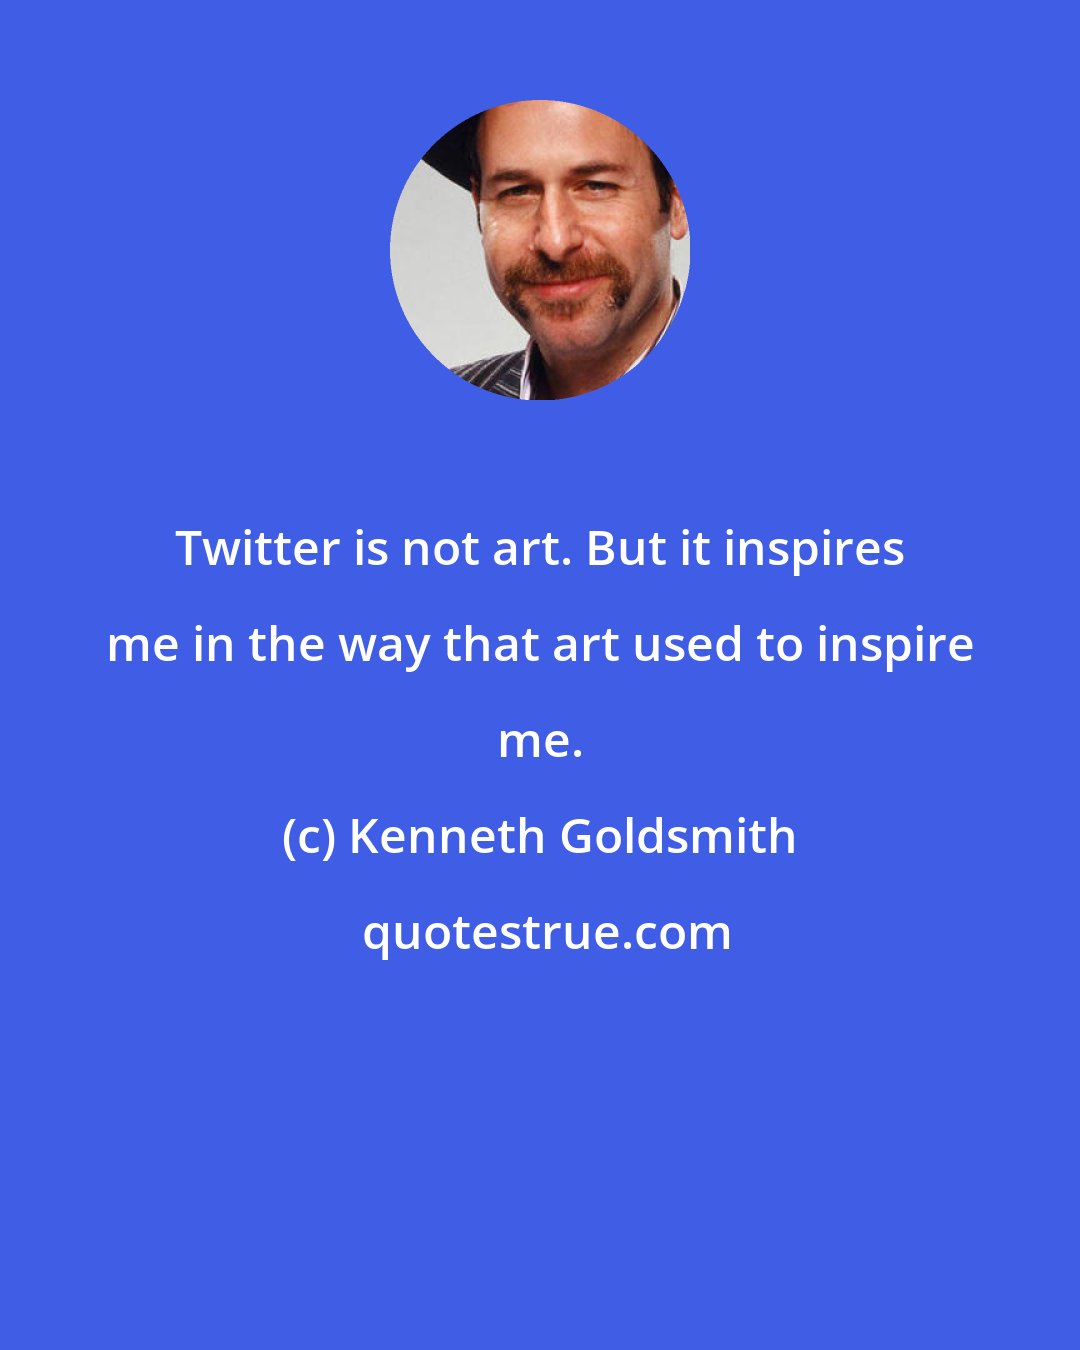 Kenneth Goldsmith: Twitter is not art. But it inspires me in the way that art used to inspire me.